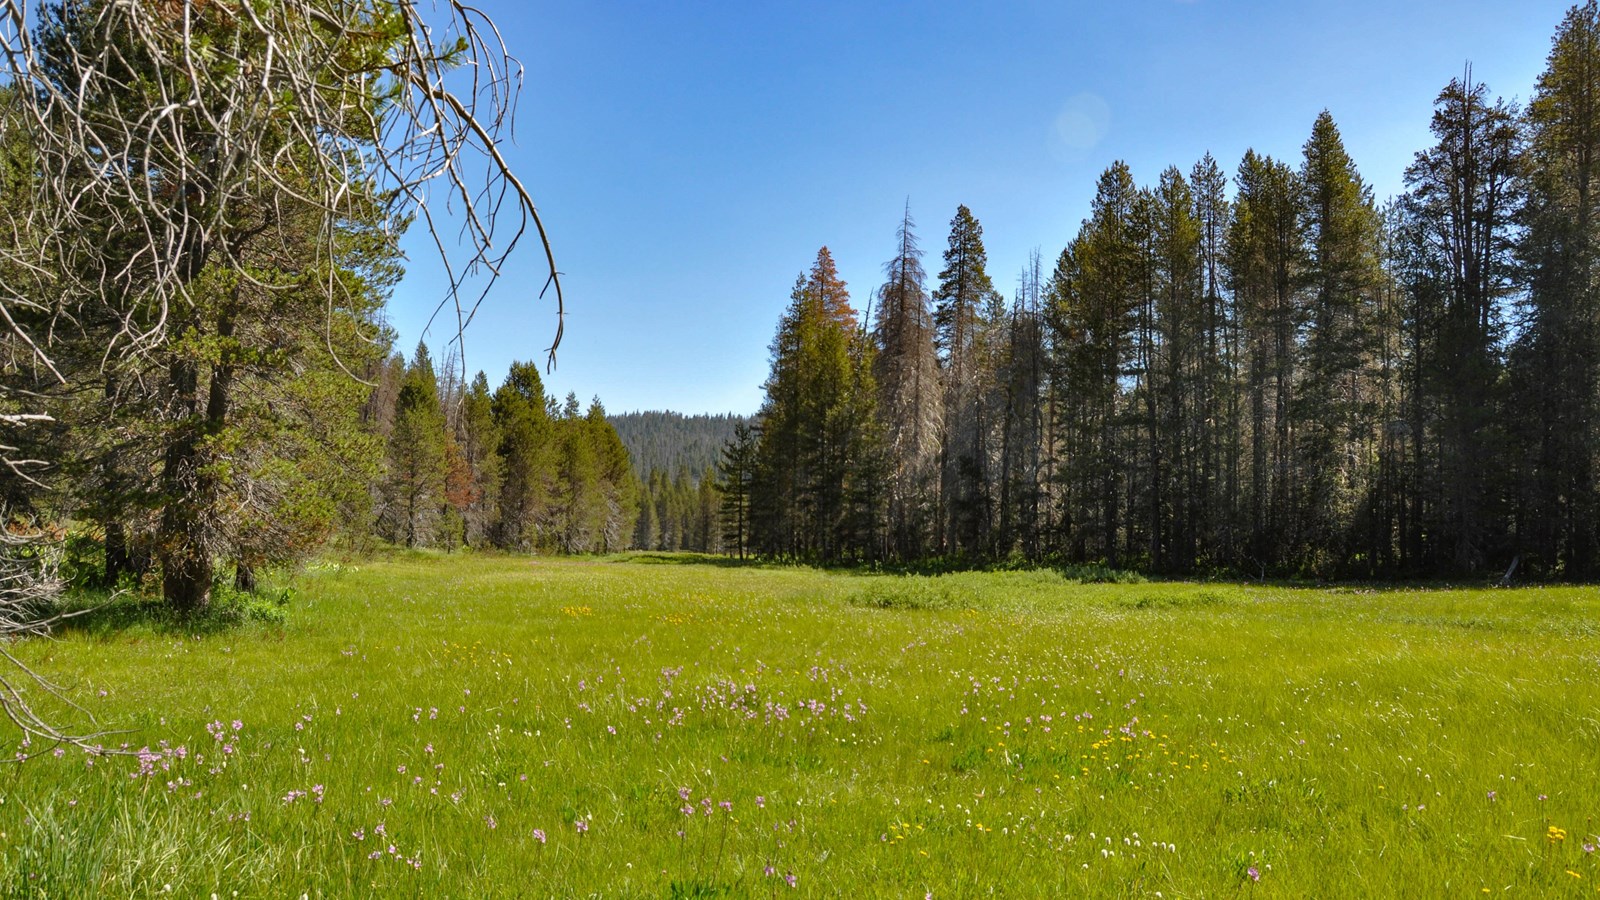 Green grassy meadow with blue skies and trees